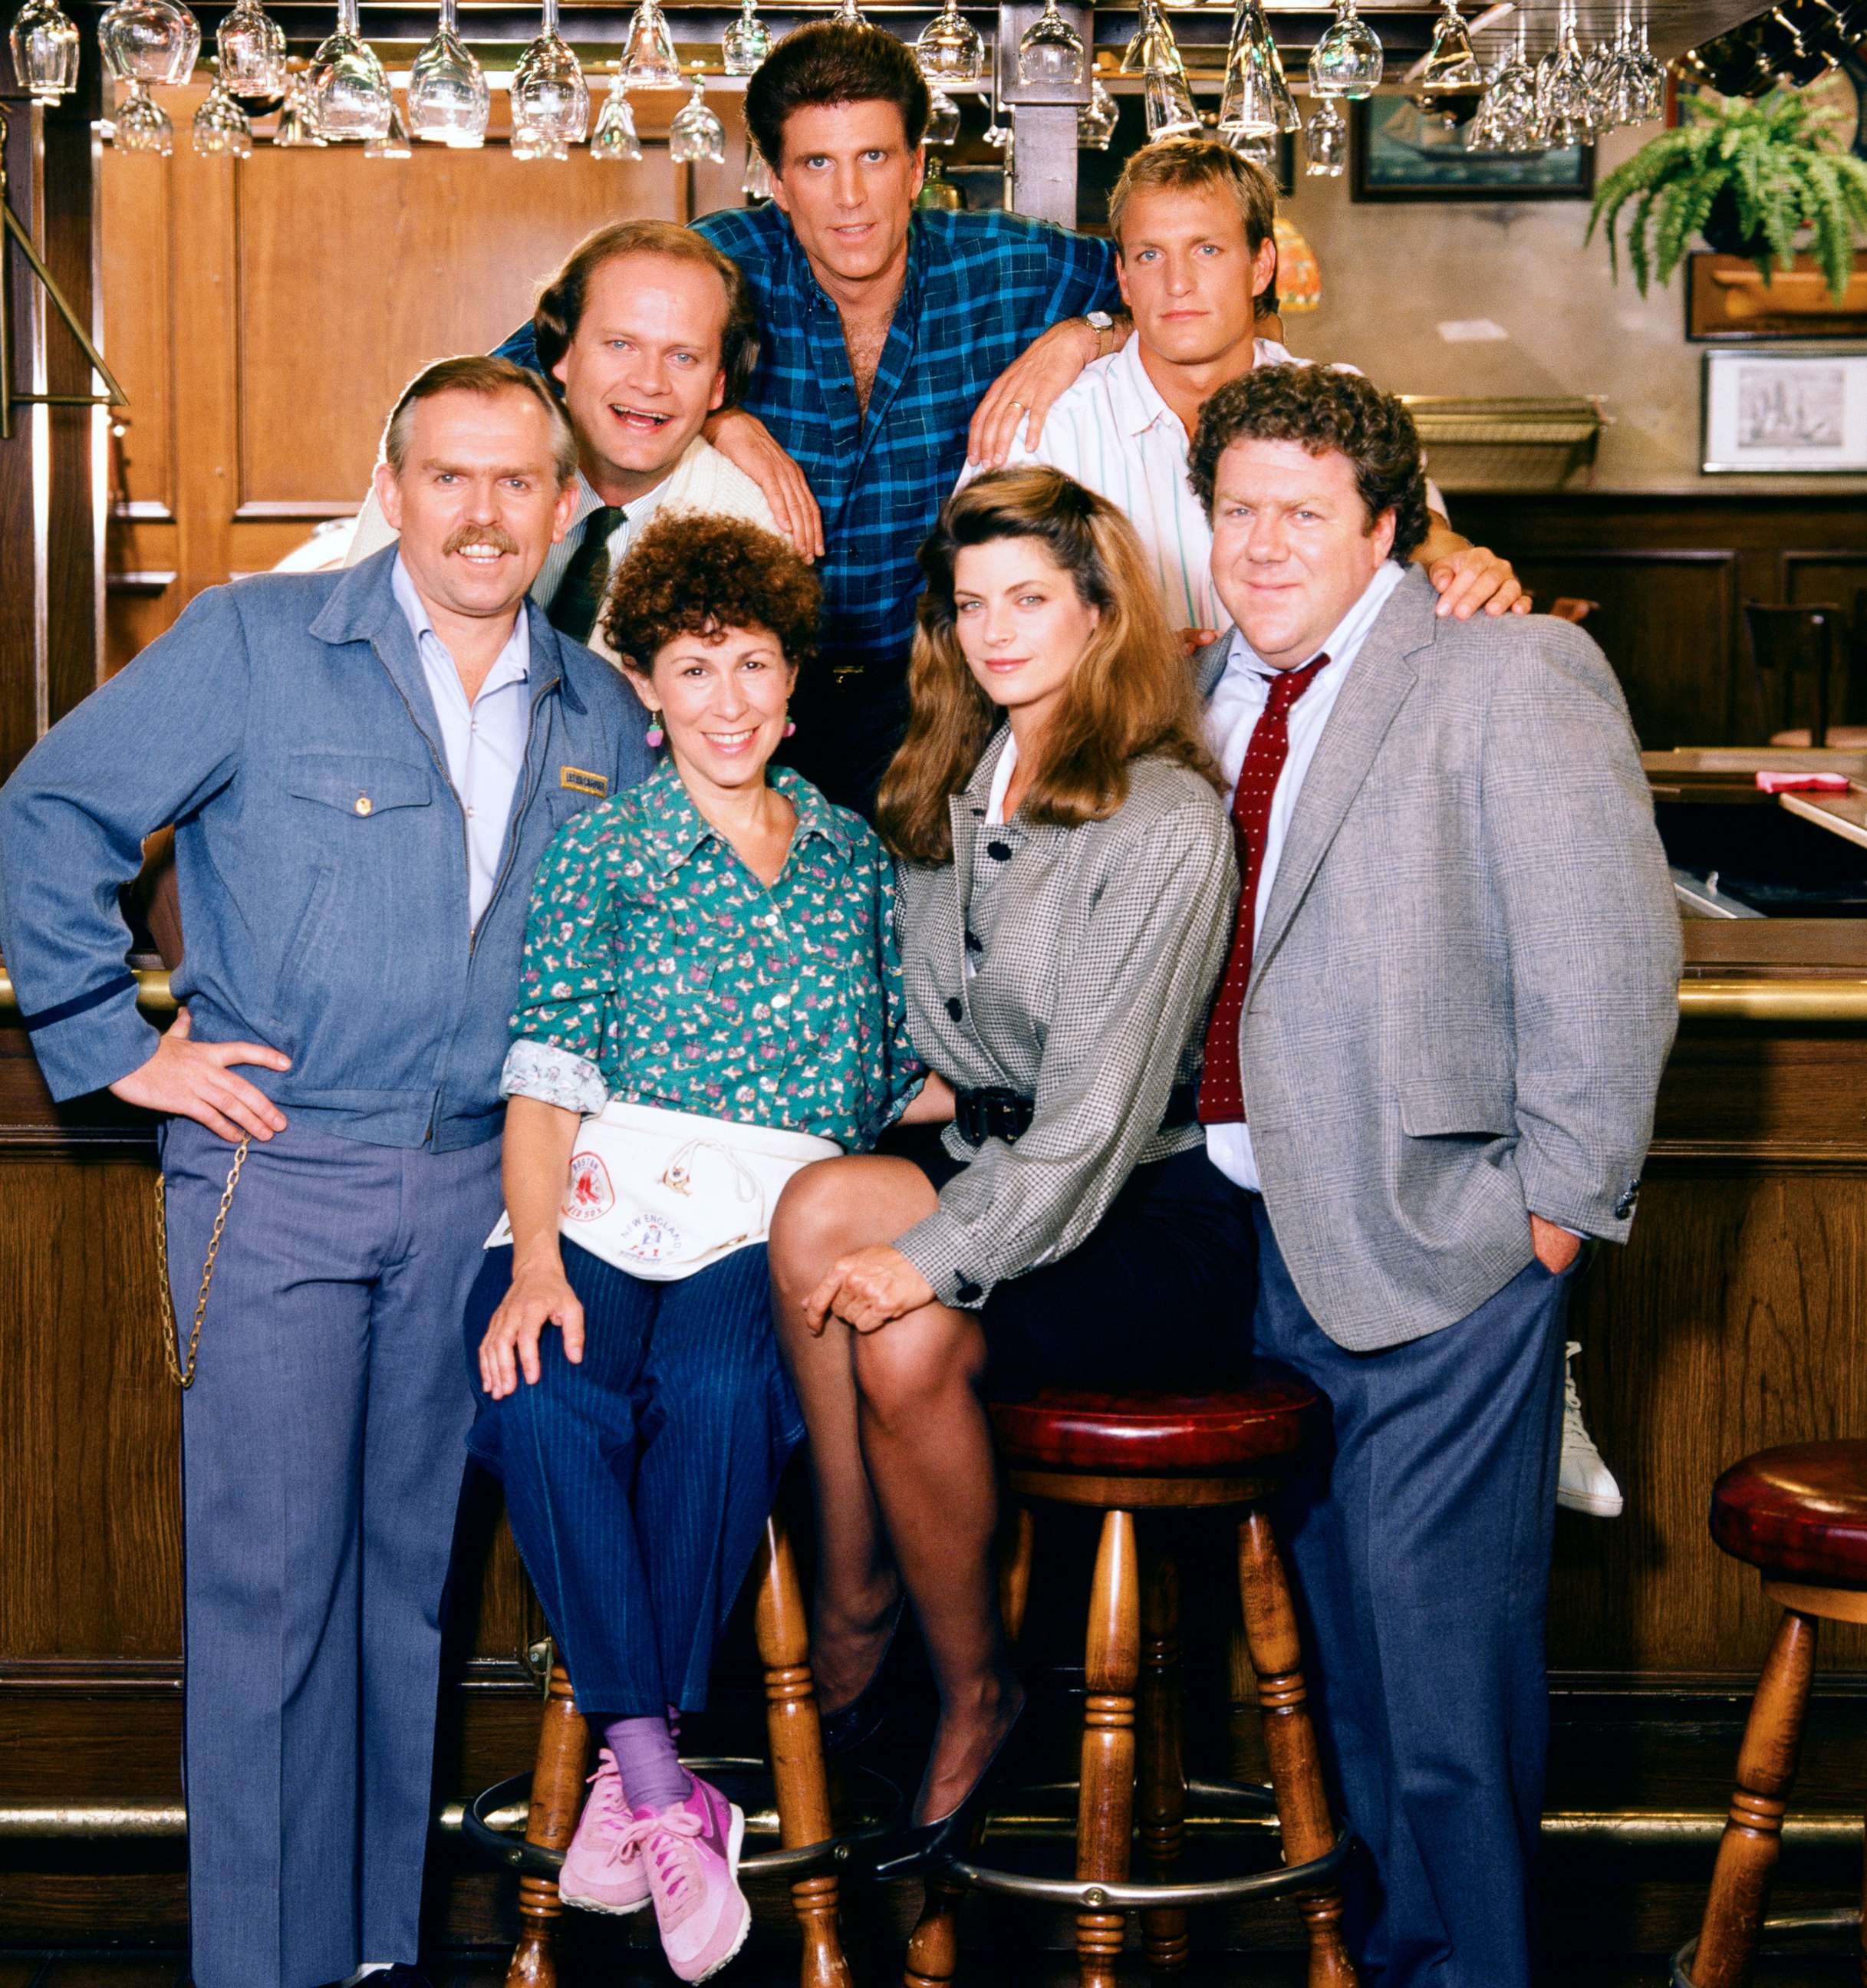 PHOTO: The cast of "Cheers."